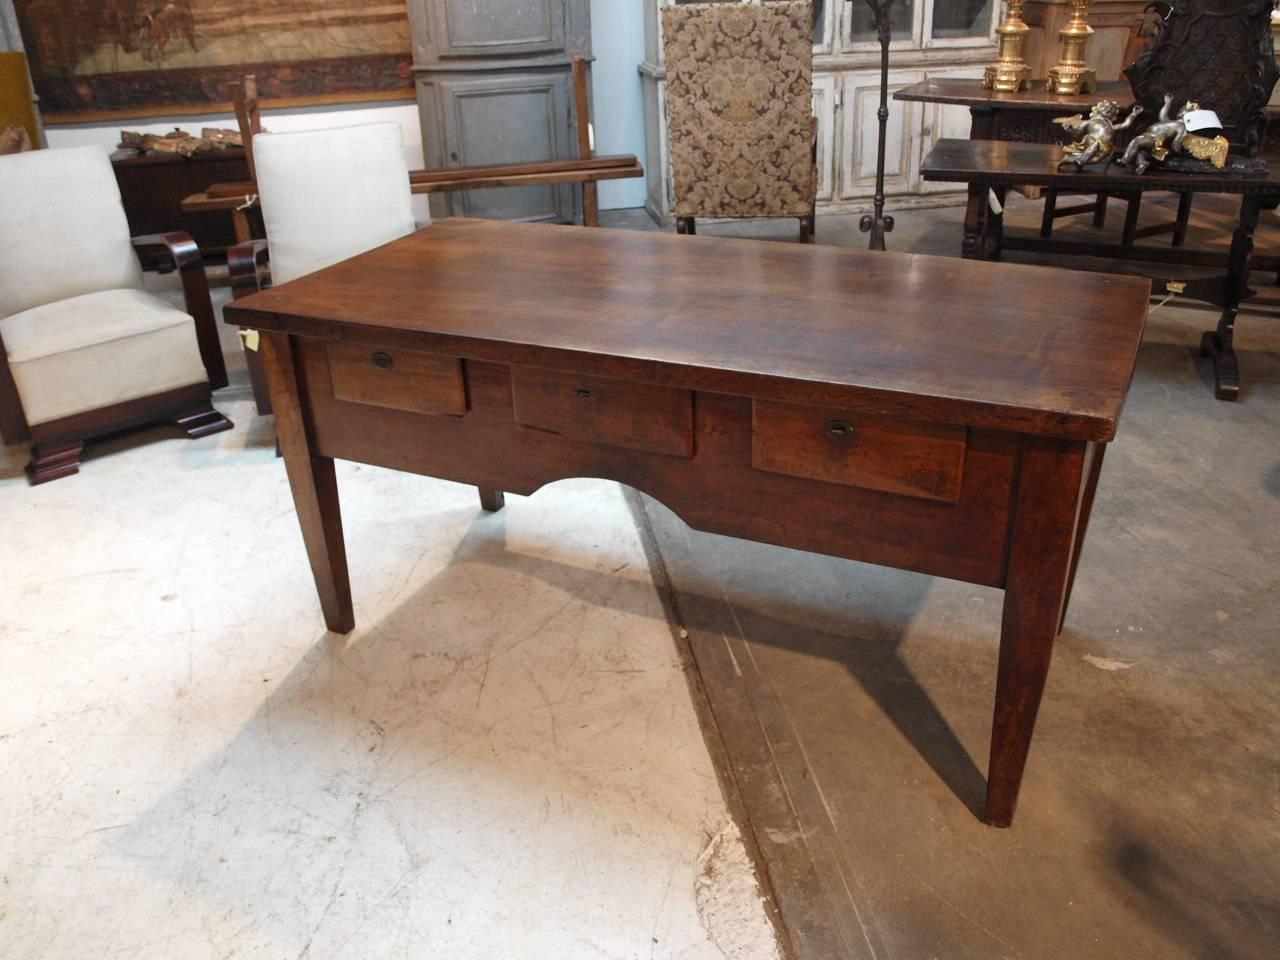 A very handsome early 19th century work table from the Catalan region of Spain. Beautifully constructed from very thick walnut. The top is solid board, the patina sumptuous and very rich. Three drawers to one side and one drawer to the other. Nice